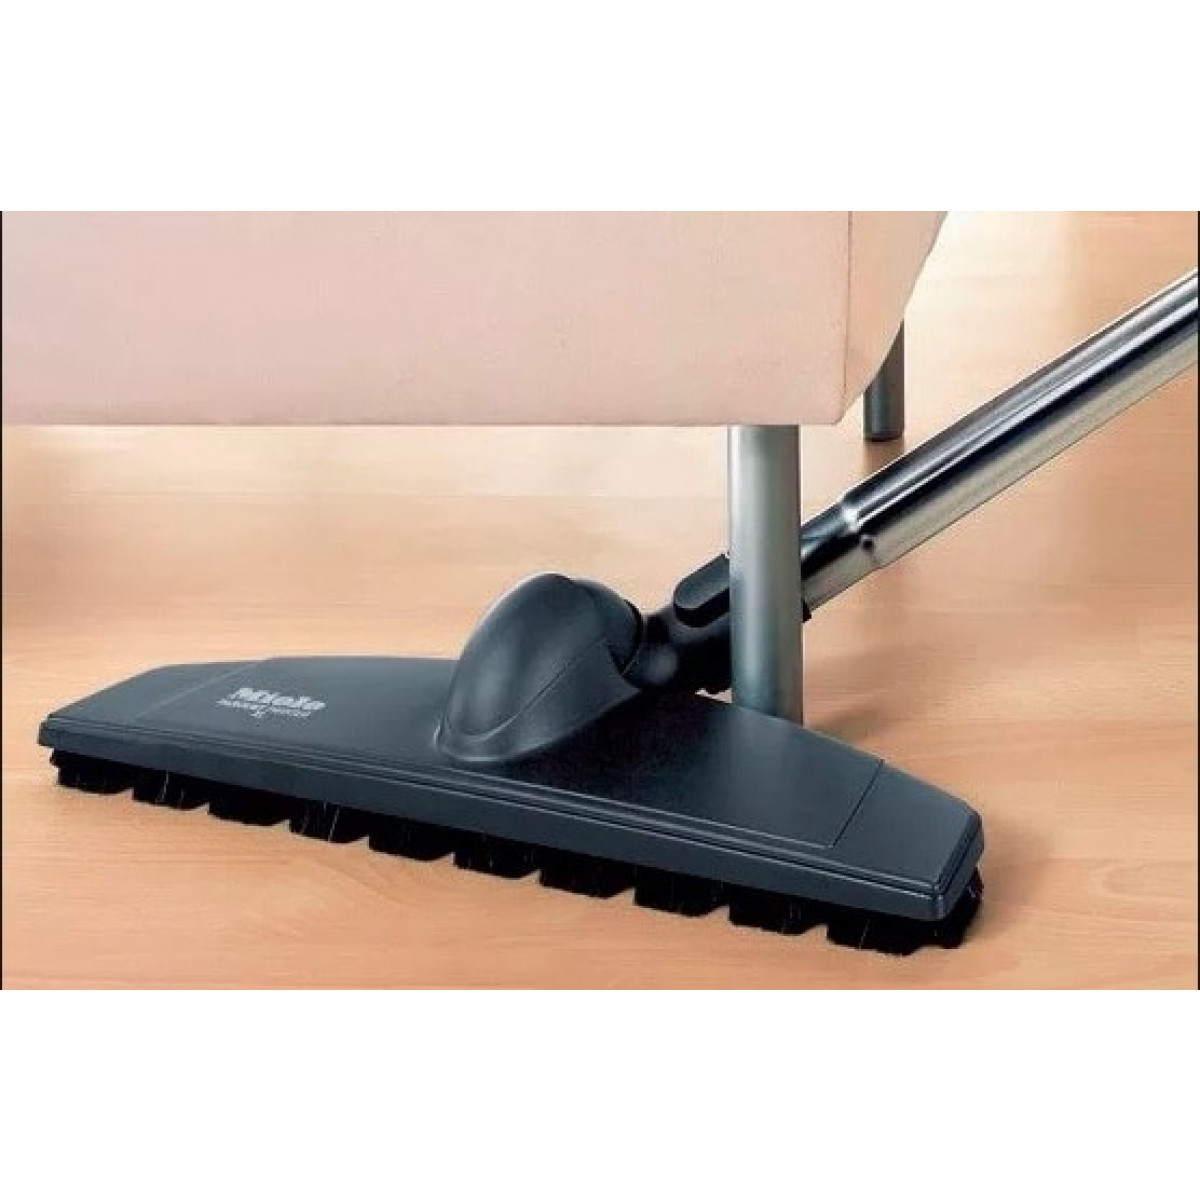 11 Lovable Lightweight Hardwood Floor Vacuum Reviews 2024 free download lightweight hardwood floor vacuum reviews of miele complete c3 calima sgfe0 canister vacuum pertaining to miele sbb 300 3 parquet twister hard flooring attachment